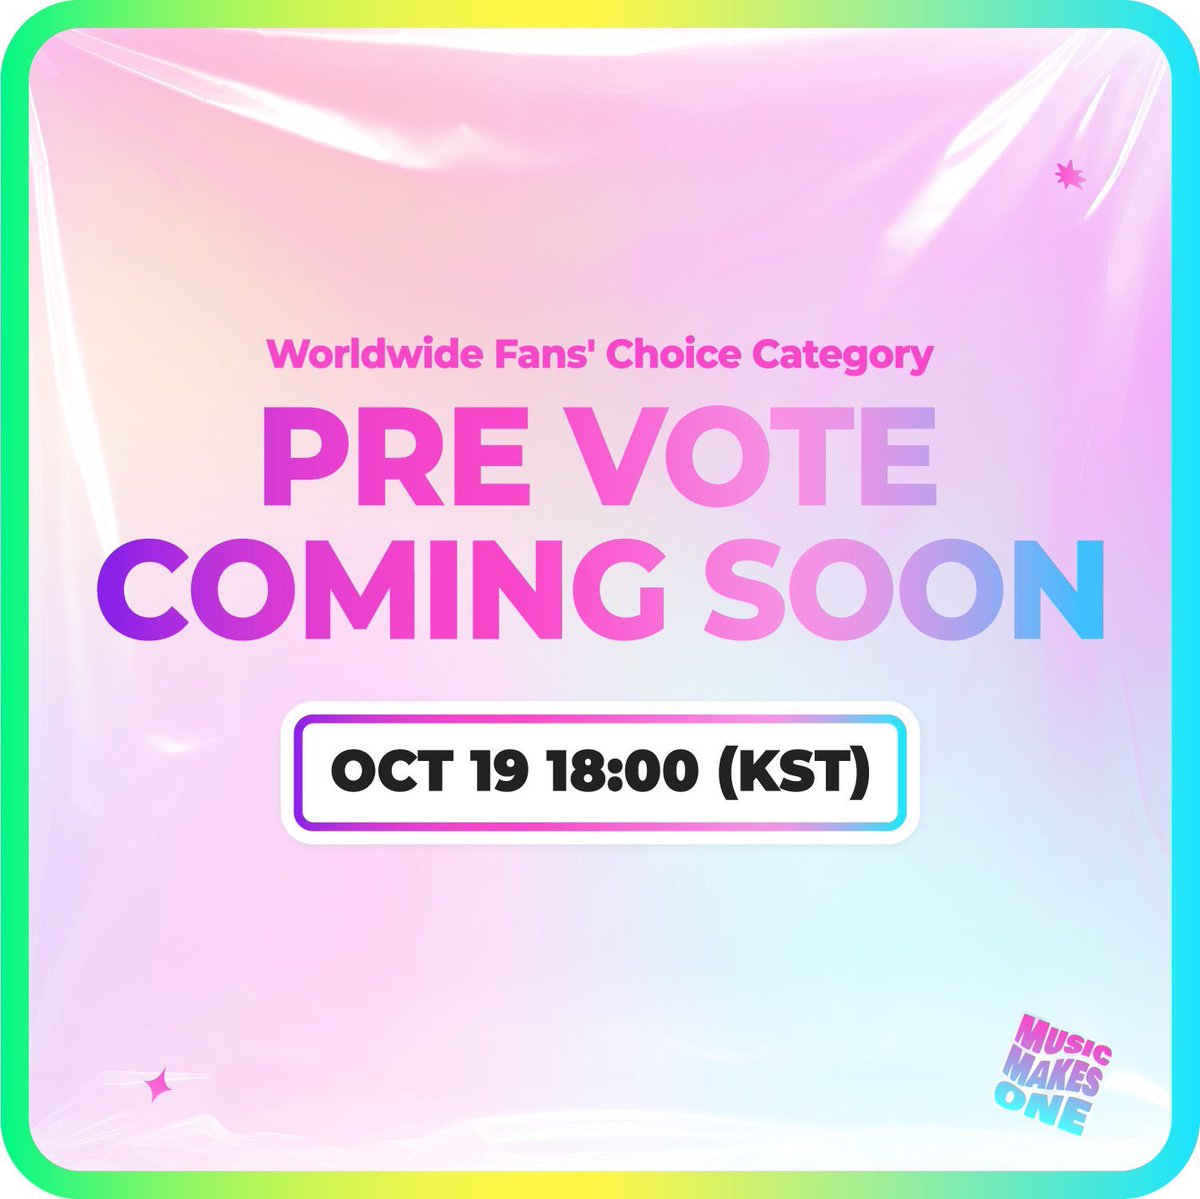 Get your Spotify and Mnet accounts ready, make sure all your Mnet accounts are registered. Spotify is the main sponsor for MAMA and voting criteria for 'Worldwide Fans' Choice' will require Spotify 24 hours to go! Every user must have 100 accounts id.mnetplus.world/sign-agree